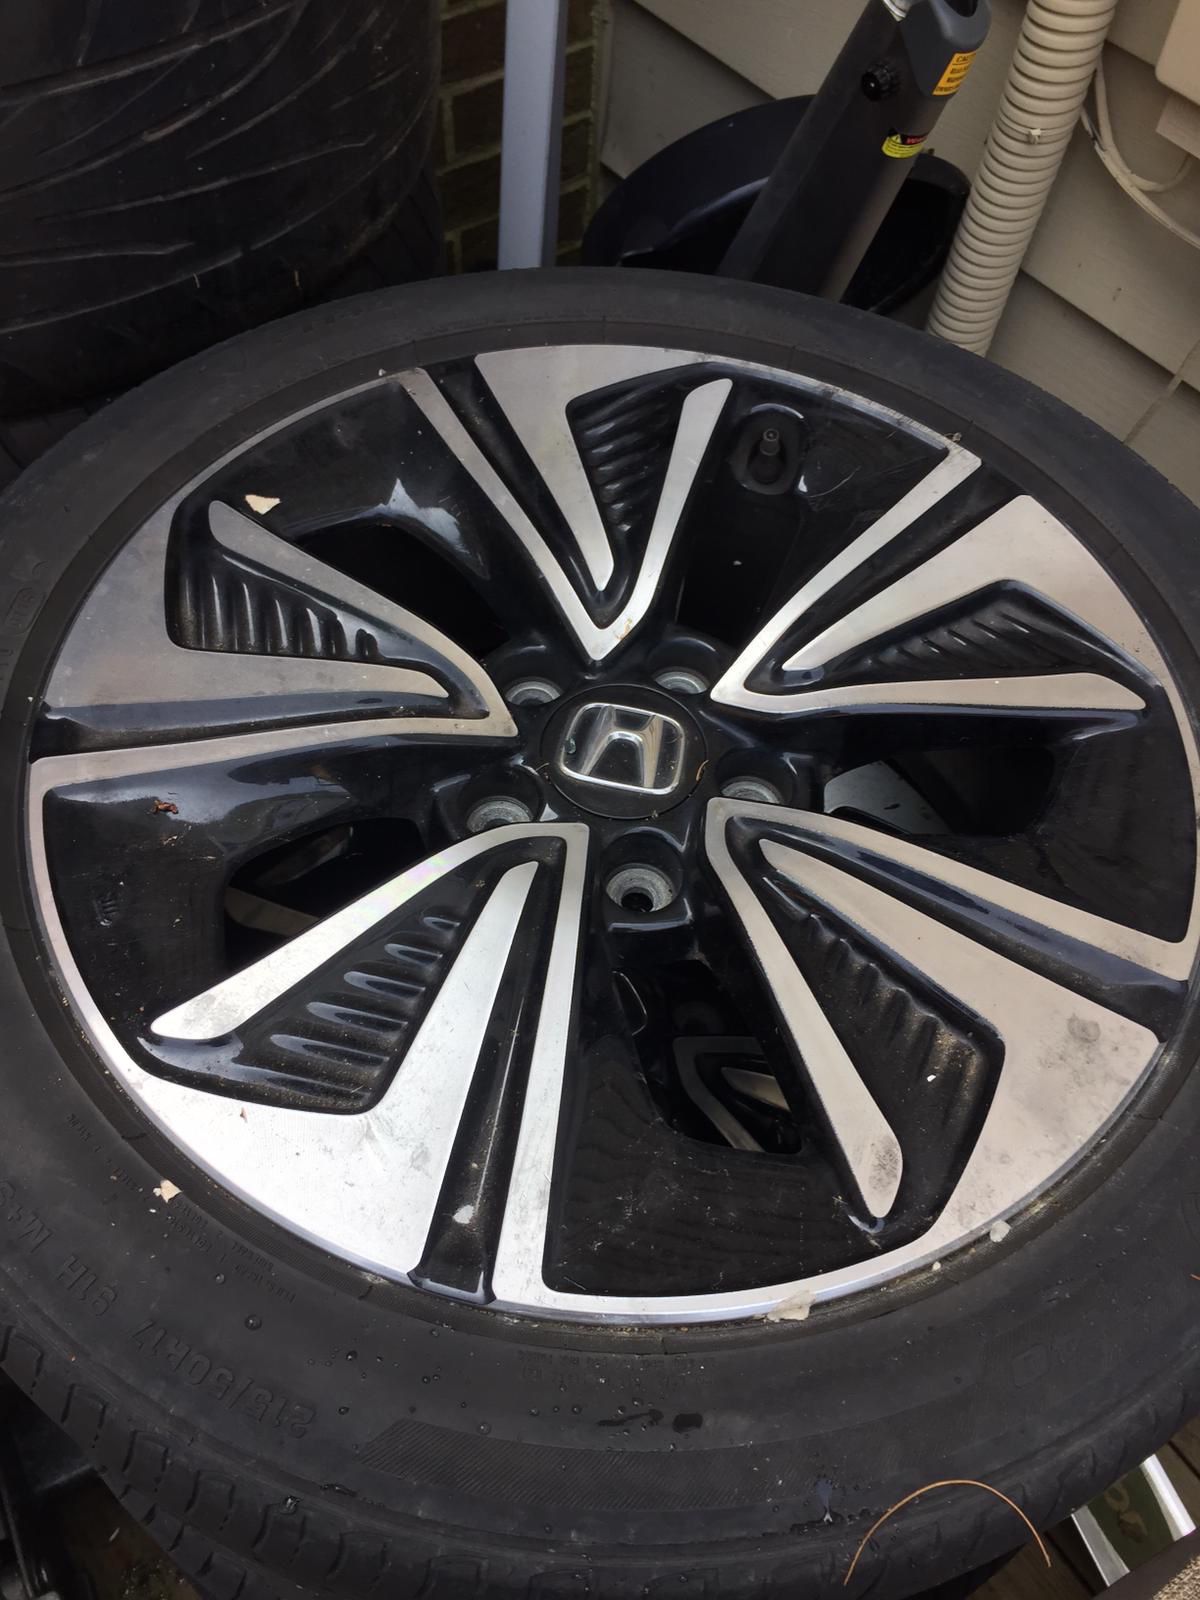 4 Honda Civic tires size 17 with rims 21550R17